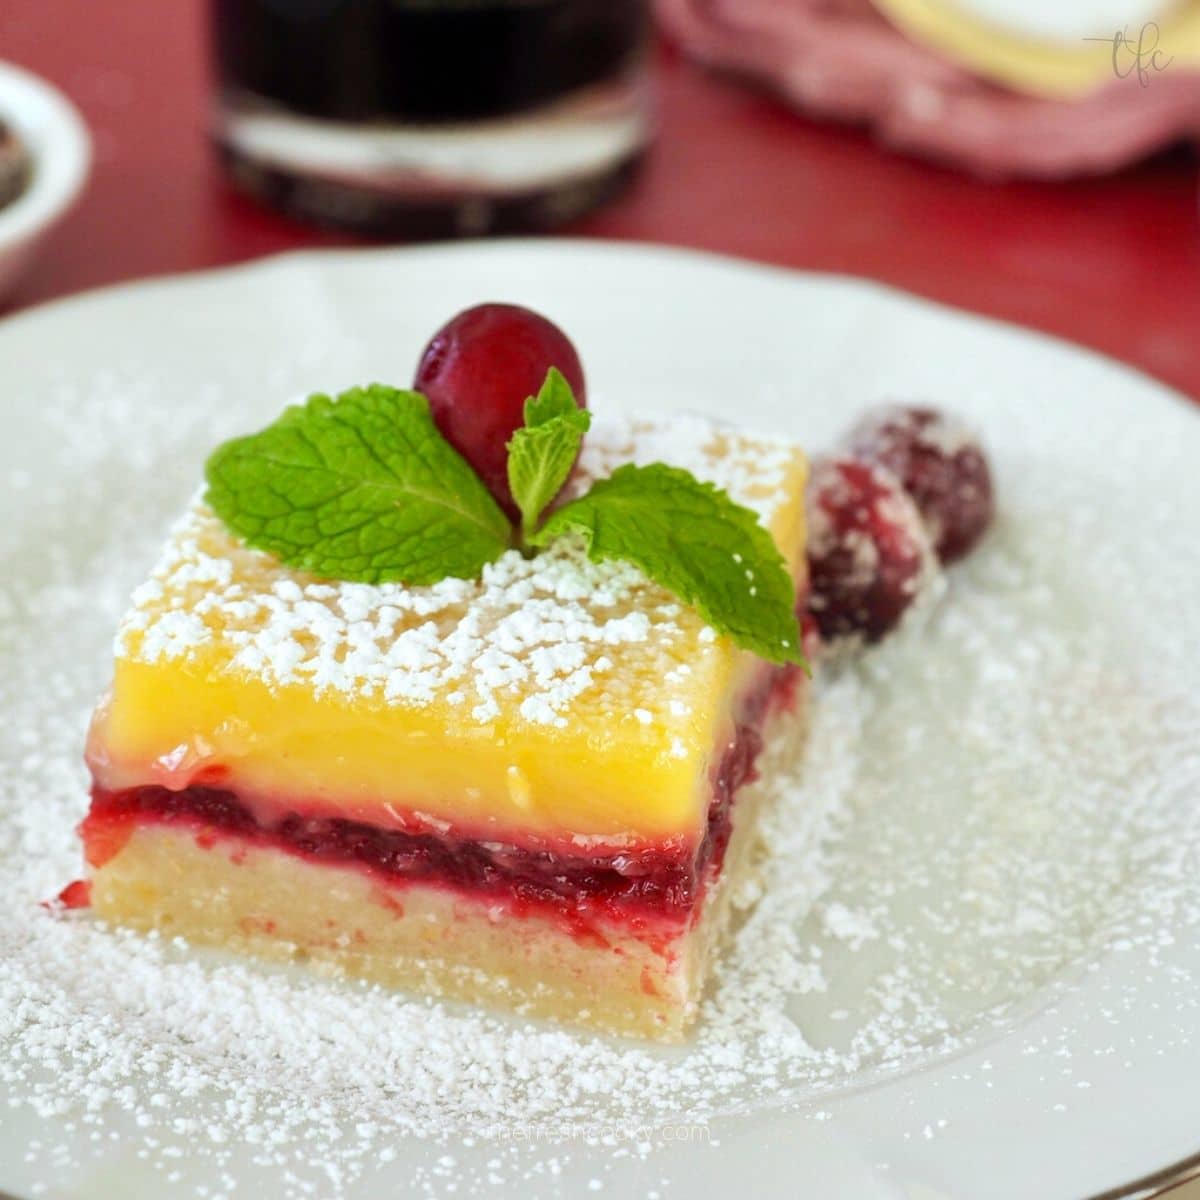 Lemon Cranberry Bars square on plate dusted with powdered sugar and decorated with sugared cranberries.